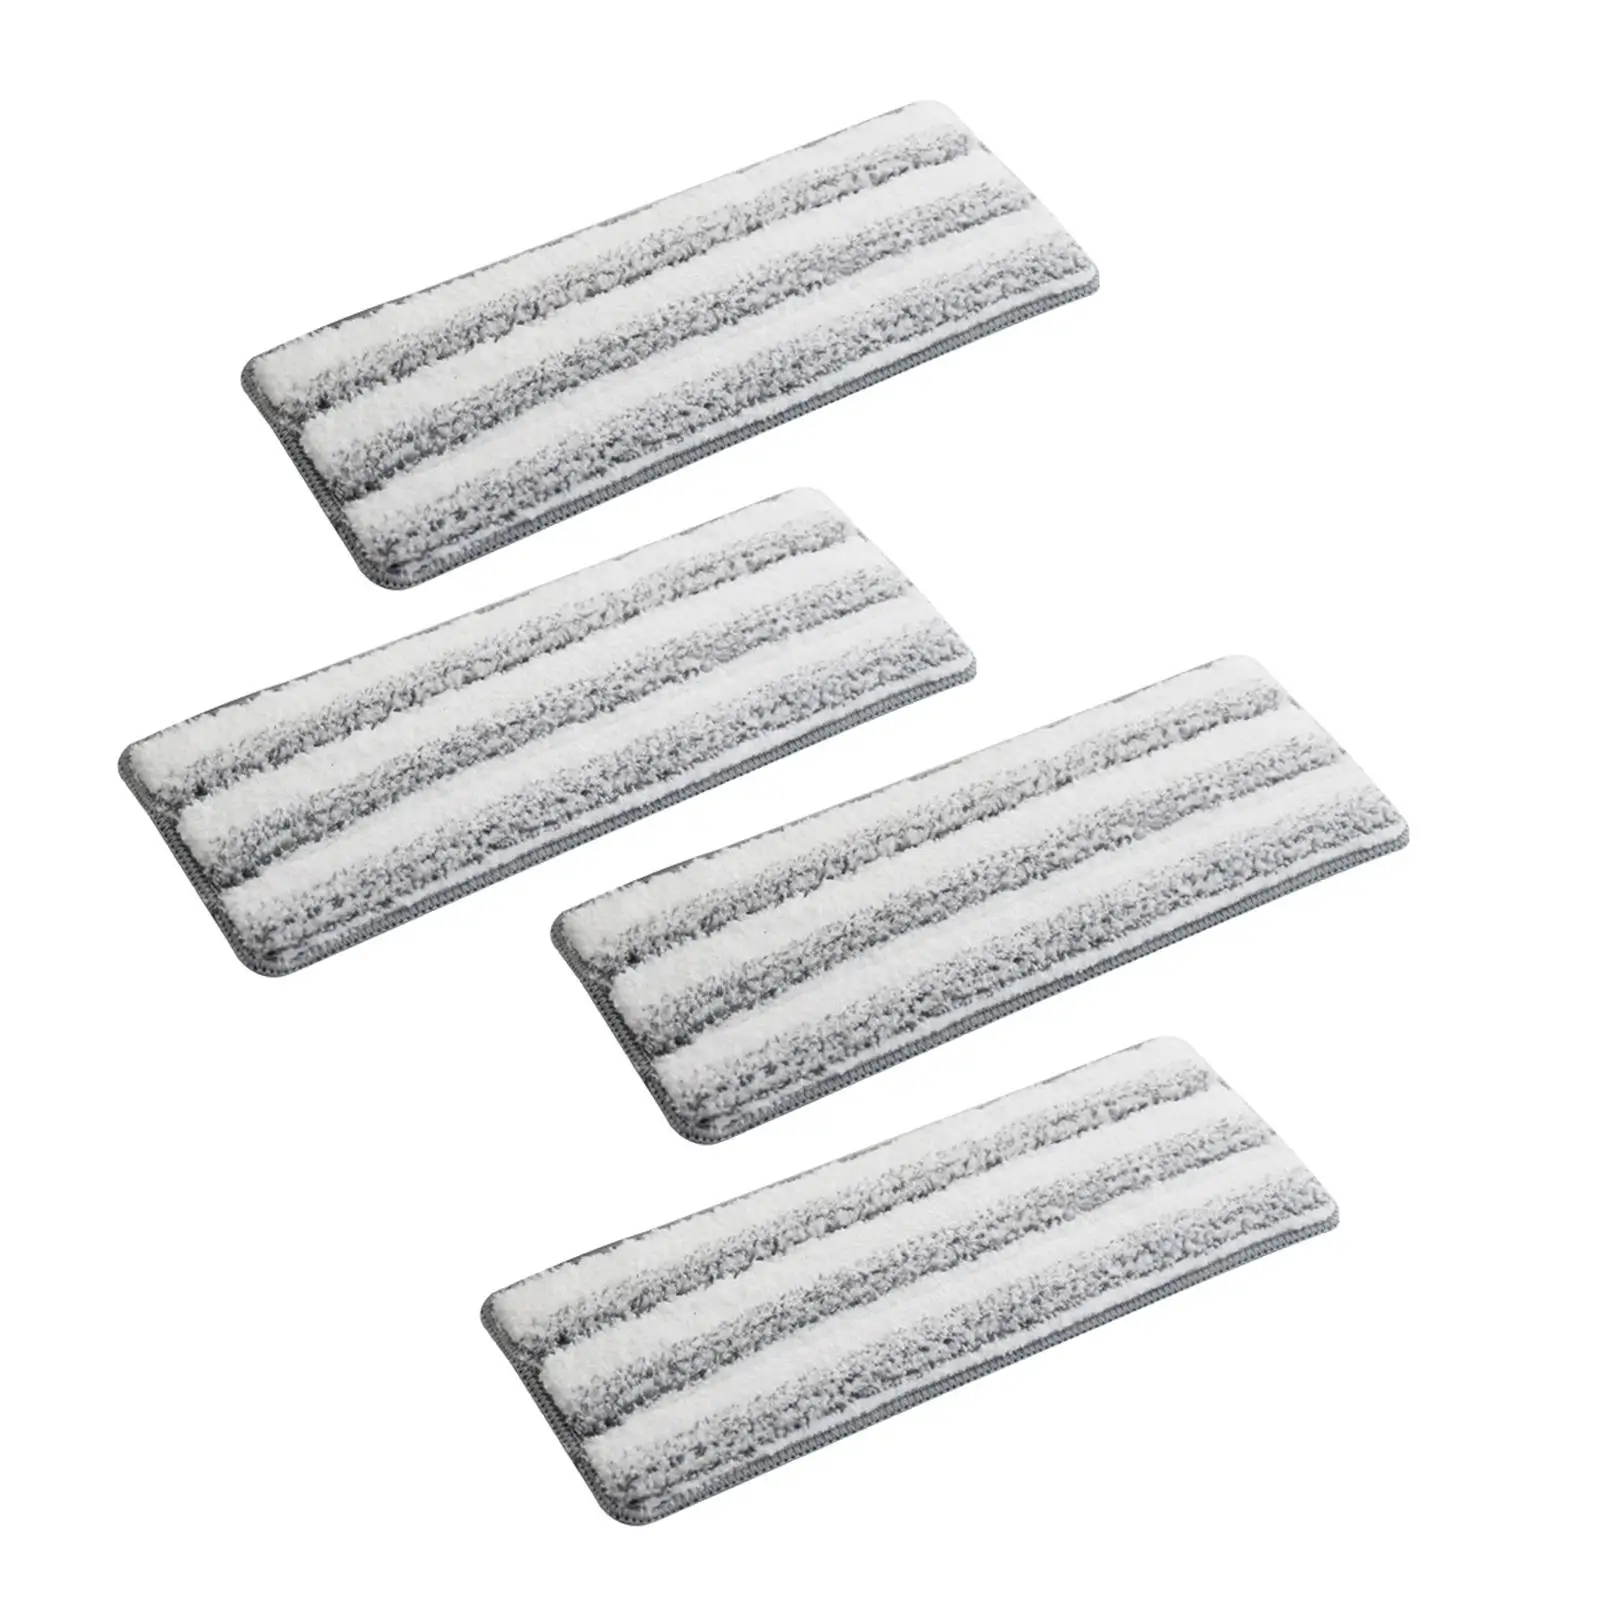 Replacement Mops Heads Refill Mops Refill for Dust Mops Pads Head for Bathroom